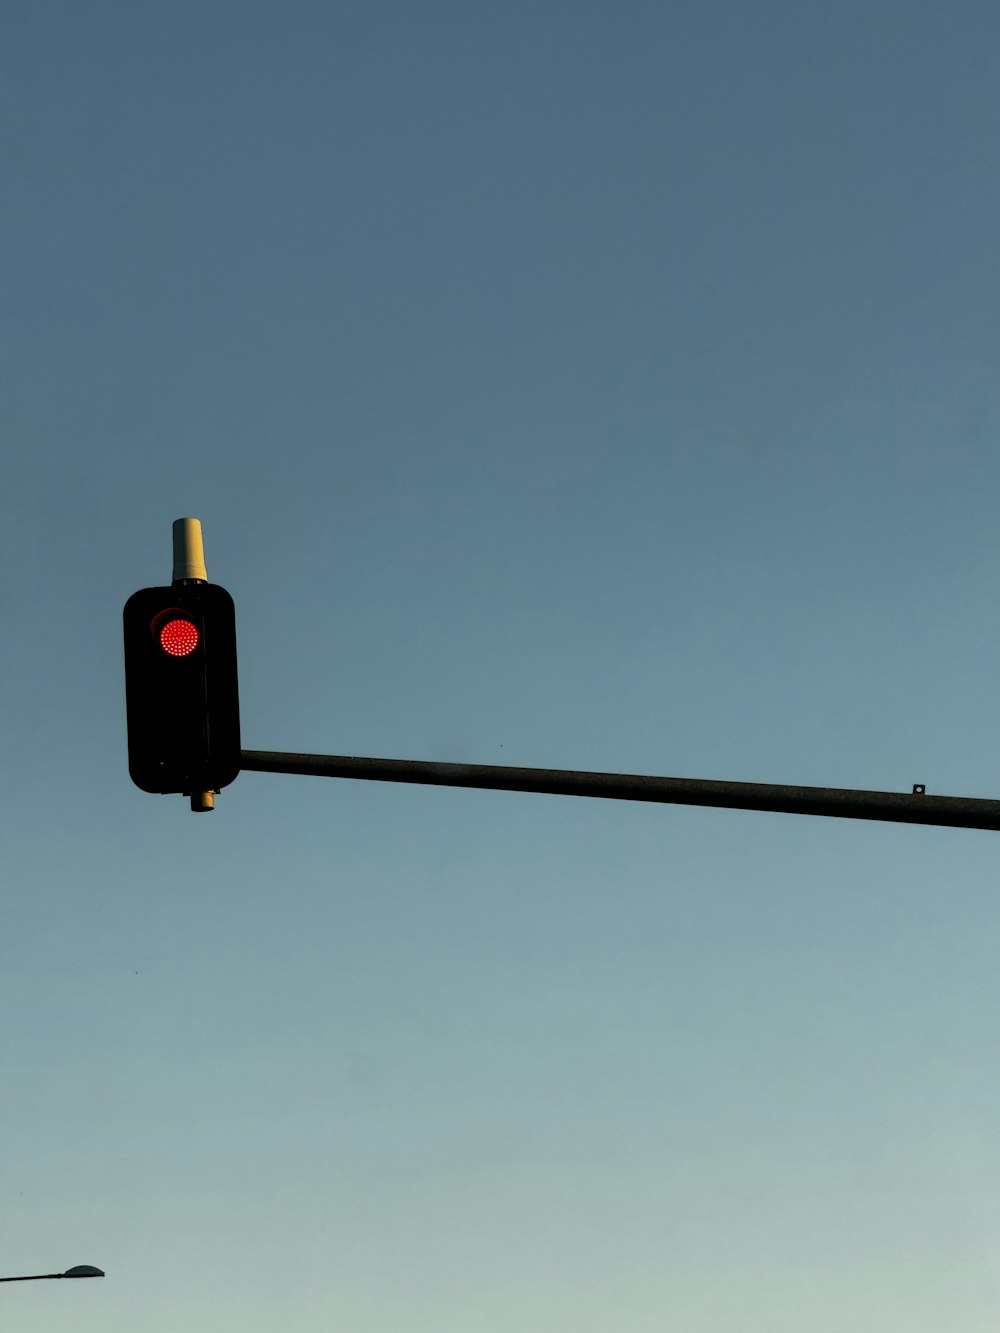 a traffic light hanging from a metal pole